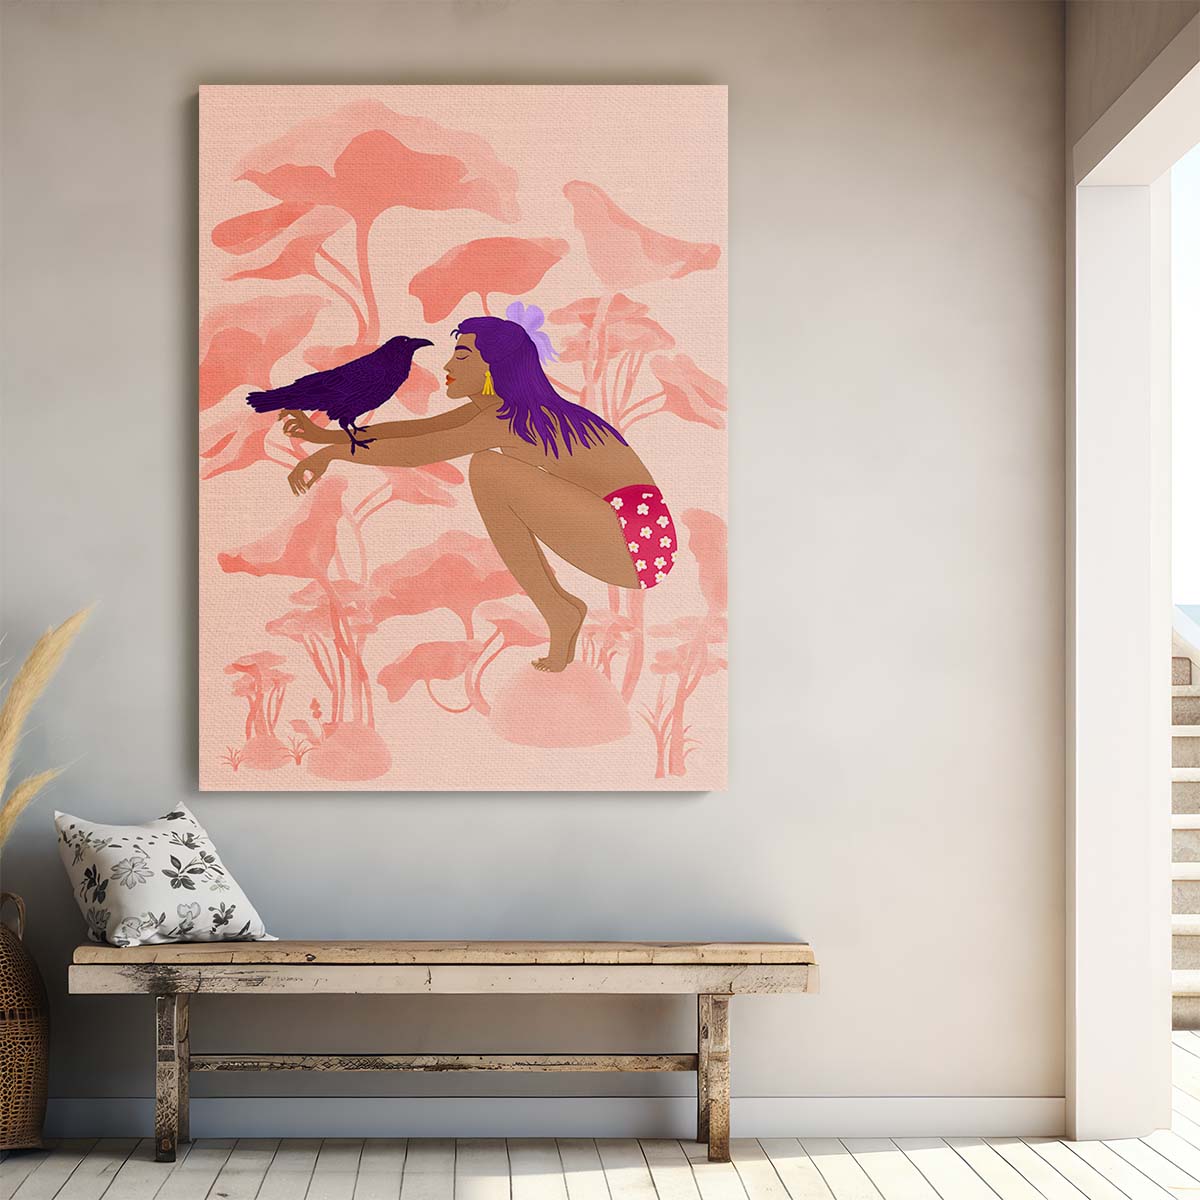 Dreamy Abstract Illustration of Woman with Raven in Vibrant Colours by Luxuriance Designs, made in USA